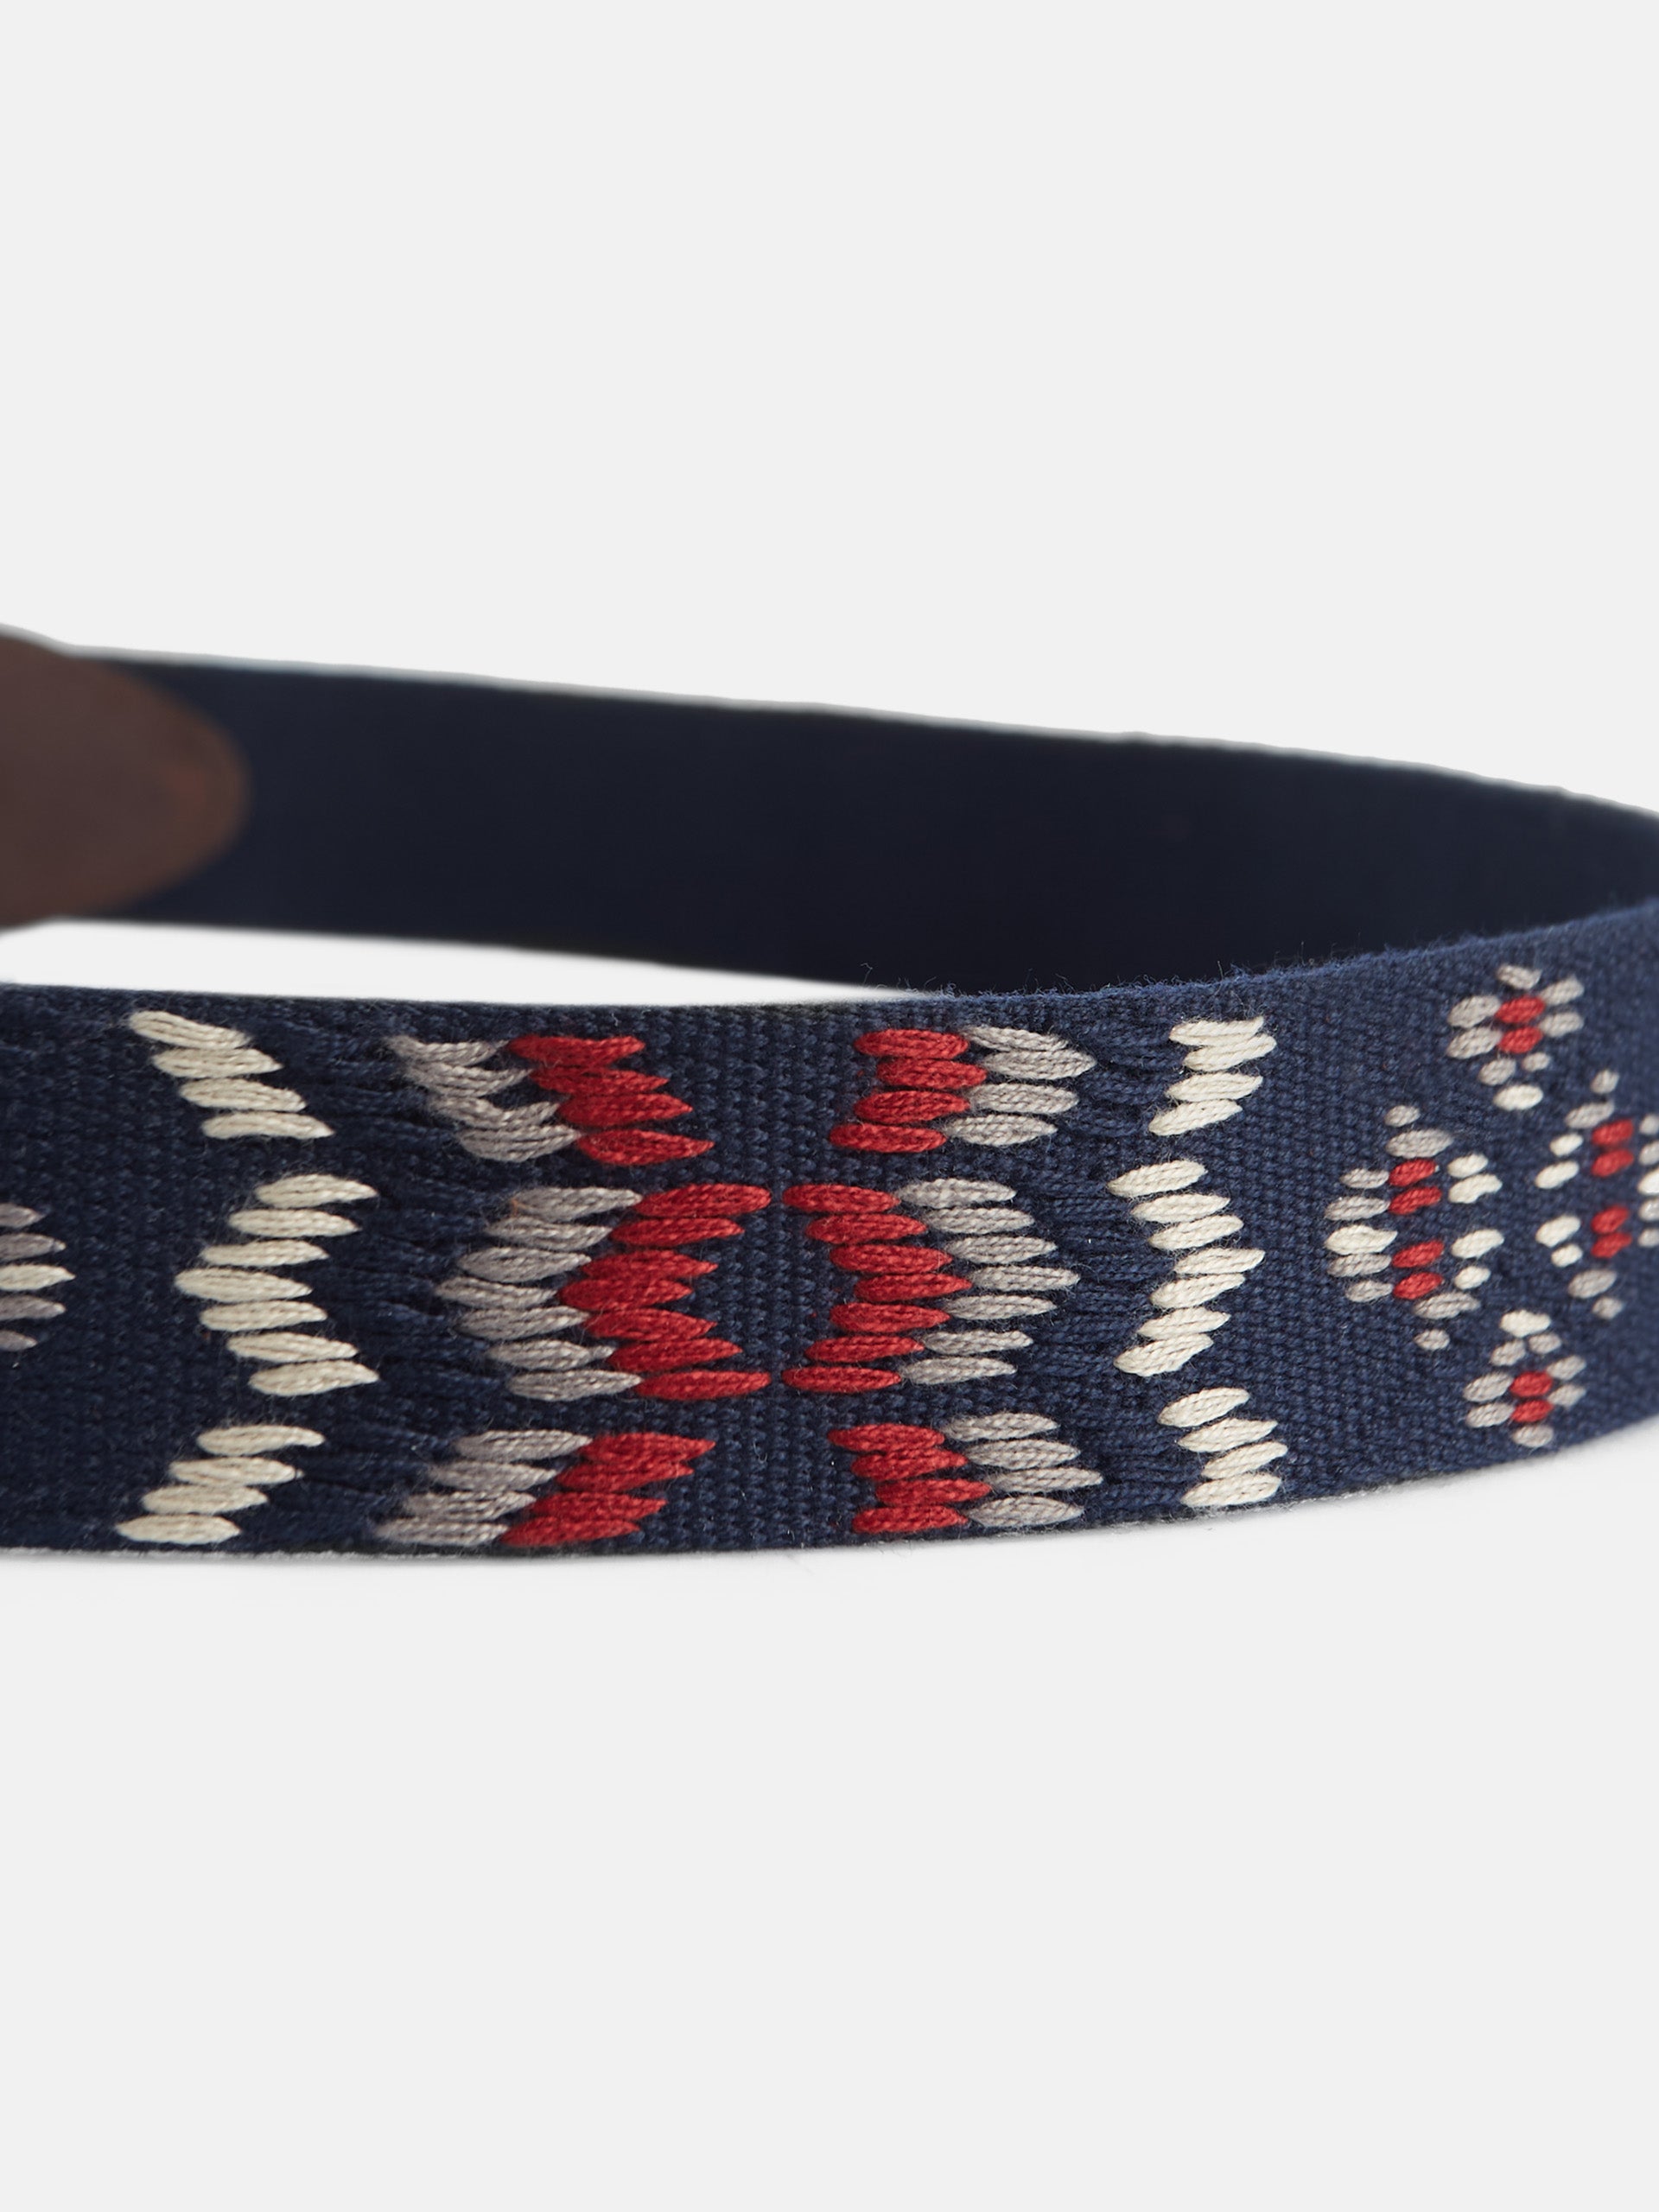 Silbon leather belt with multicolored fabric detail